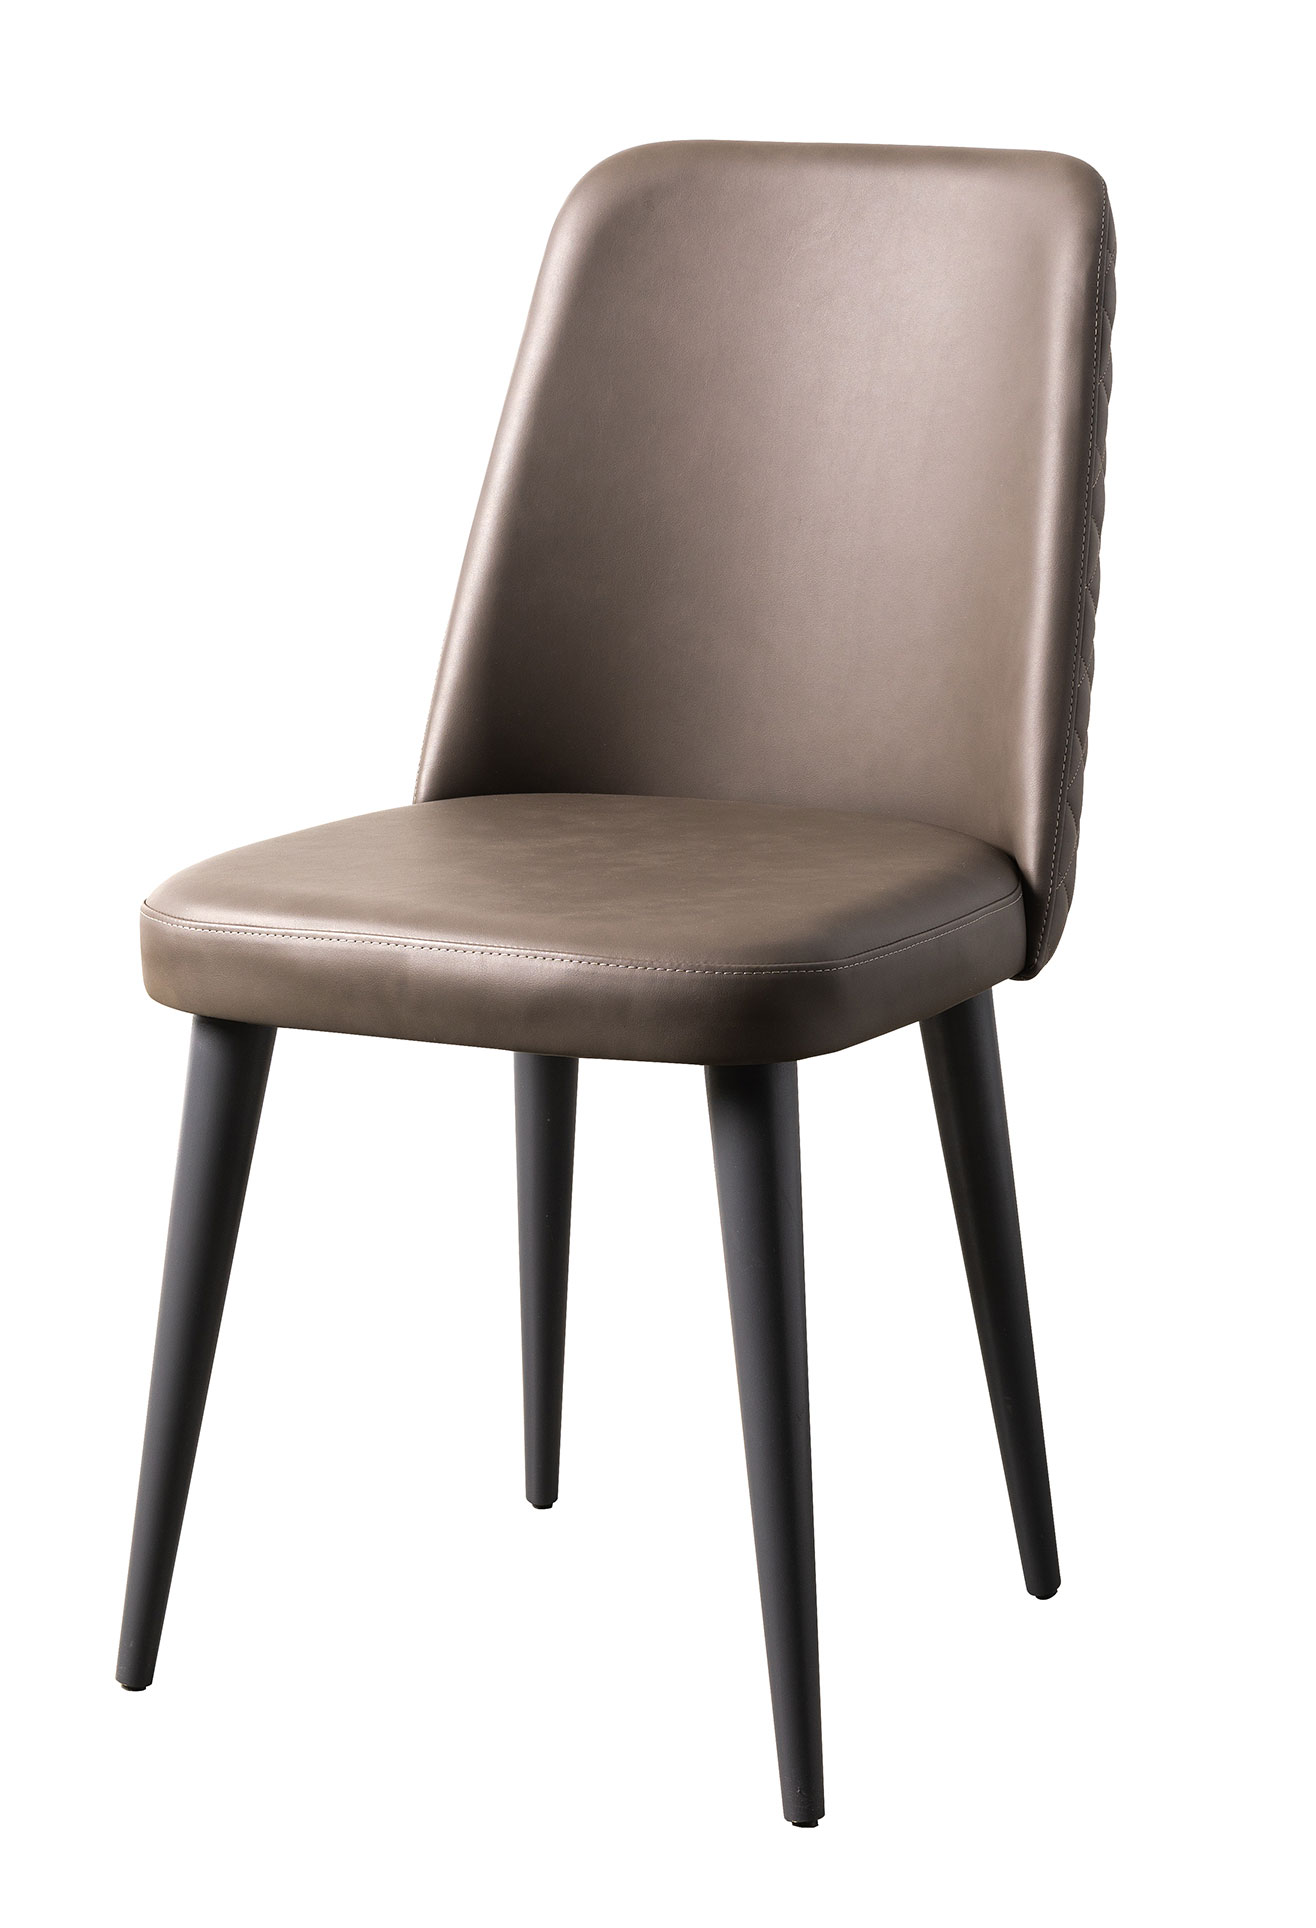 Brands Arredoclassic Dining Room, Italy Nora Chair